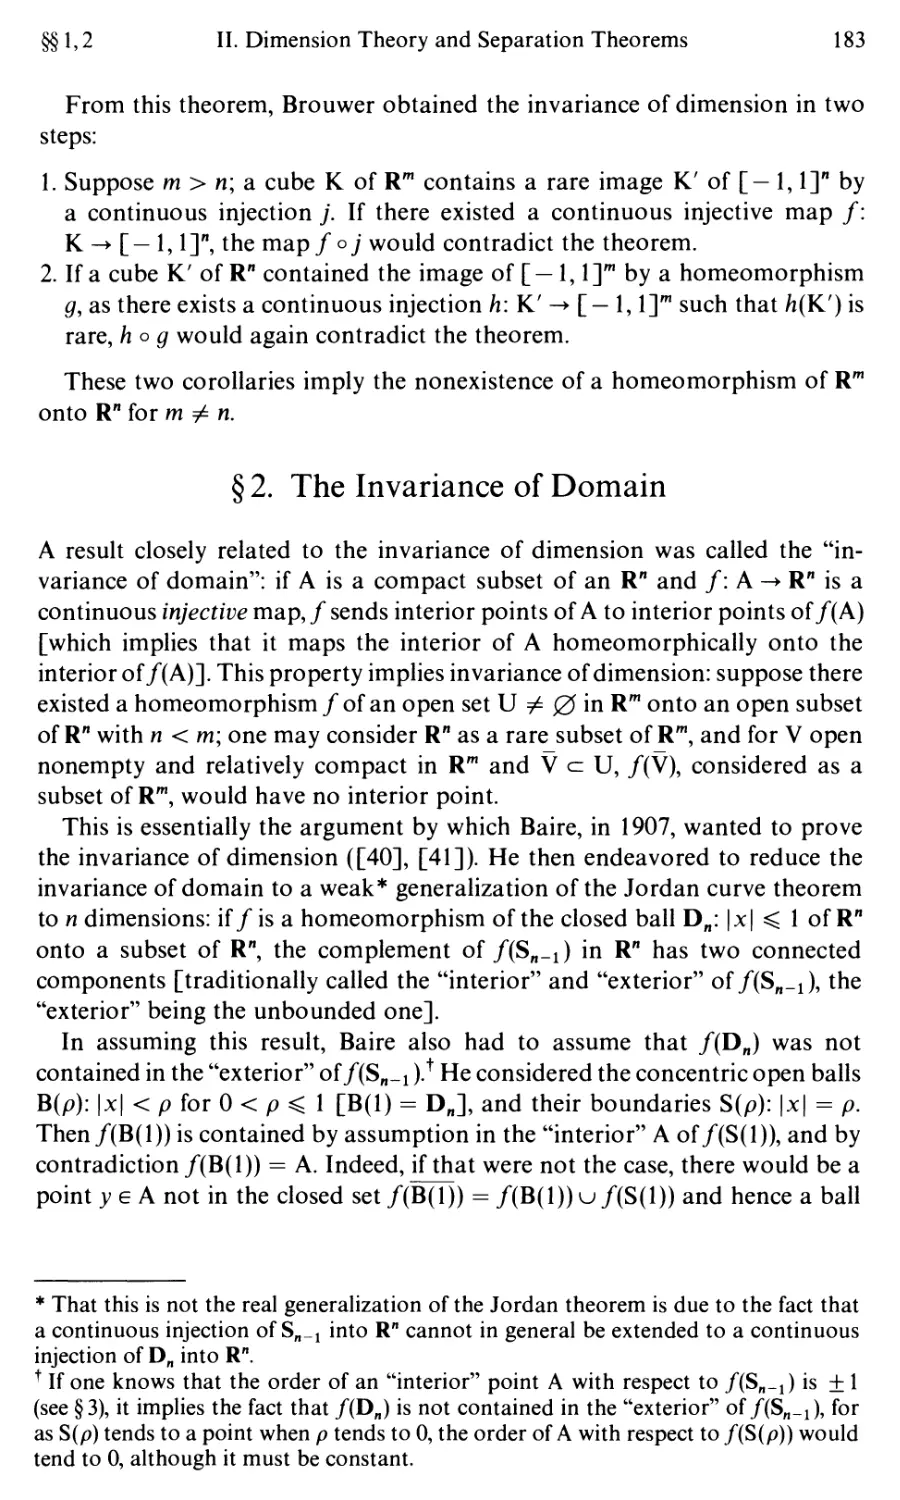 §2. The Invariance of Domain